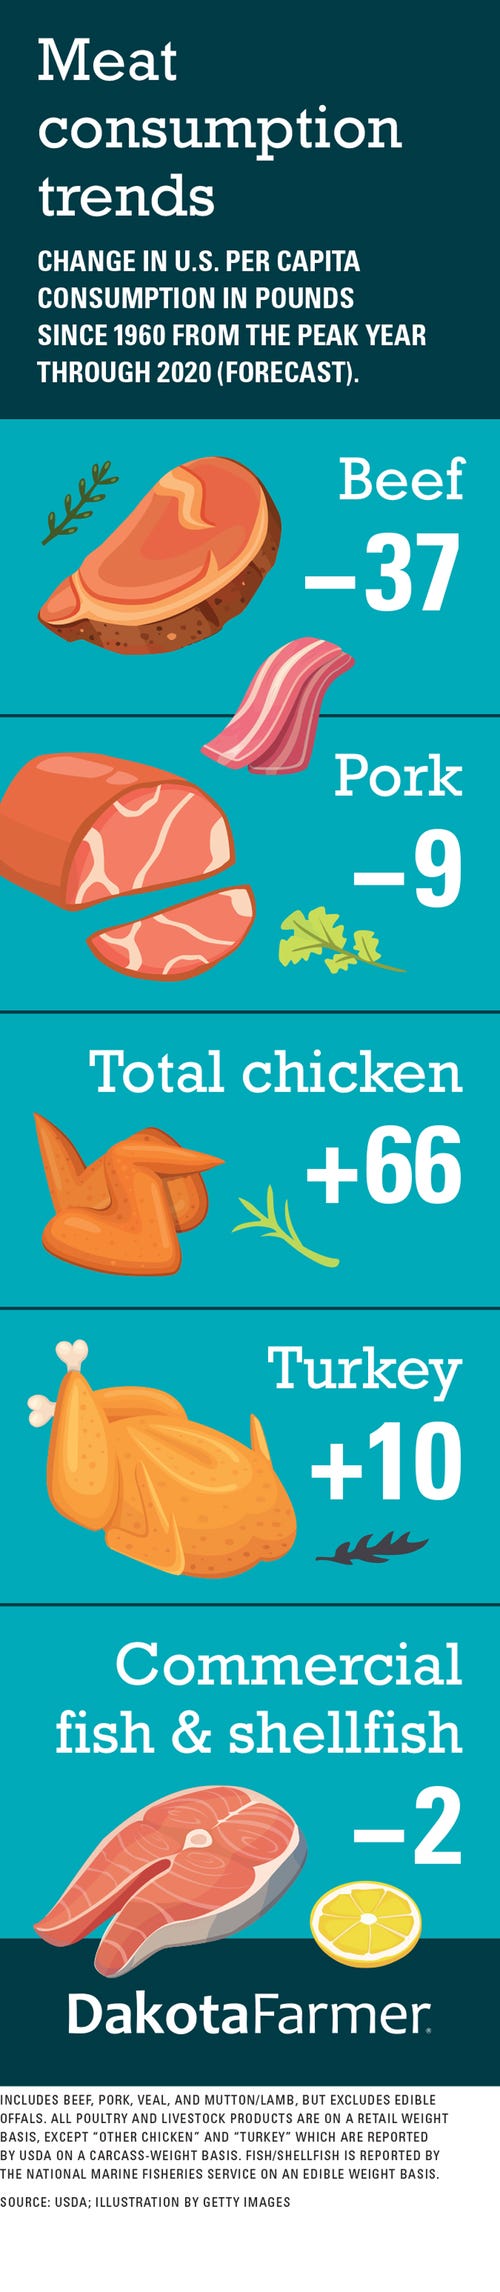 infographic about meat consumption trends